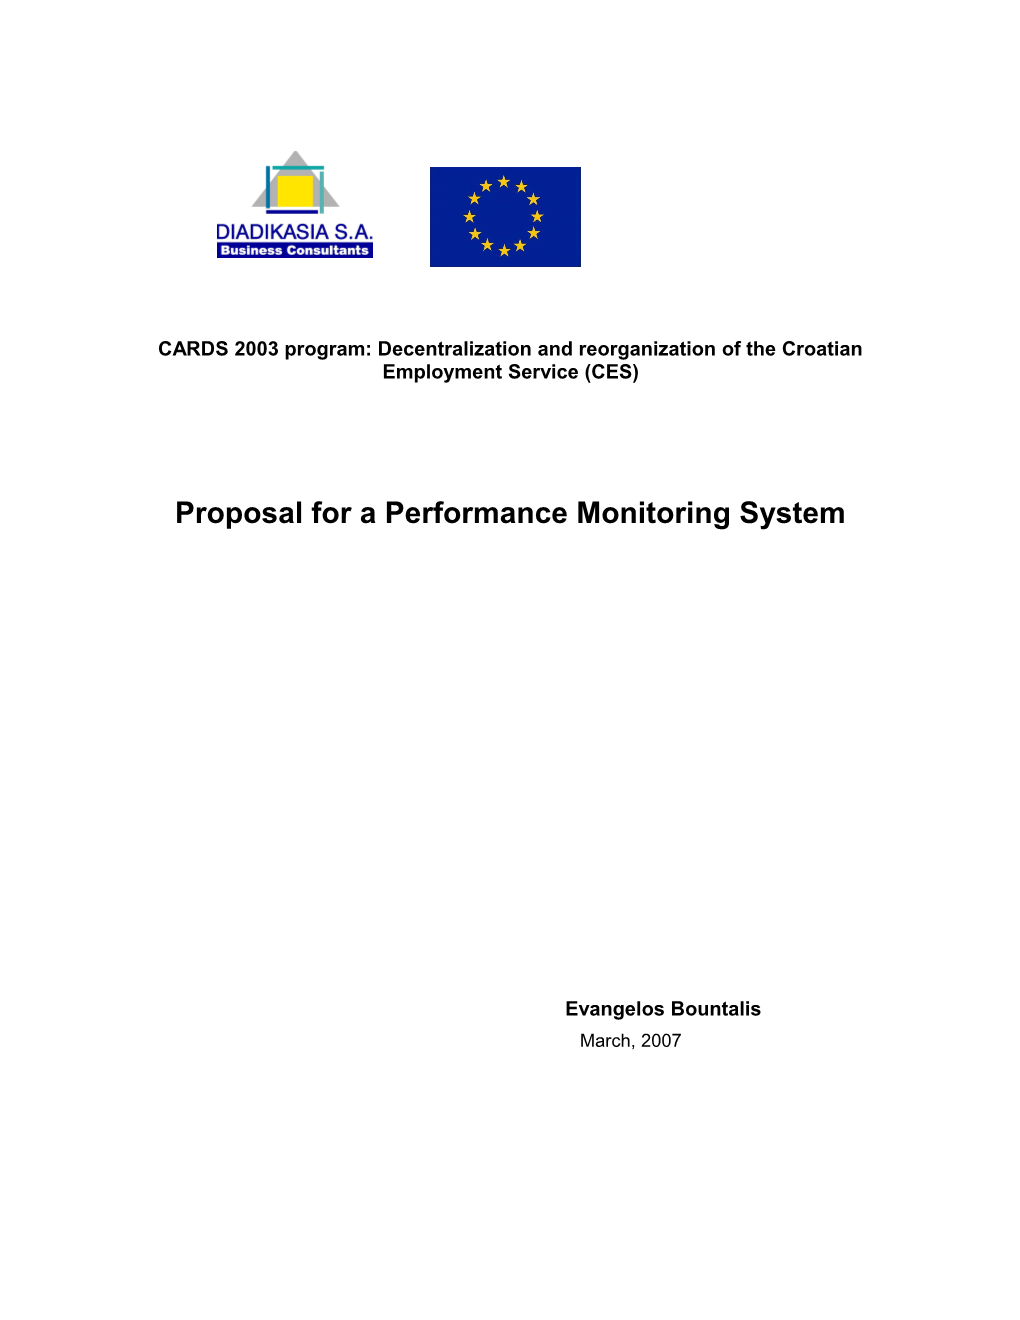 Proposal for a Performance Monitoring System